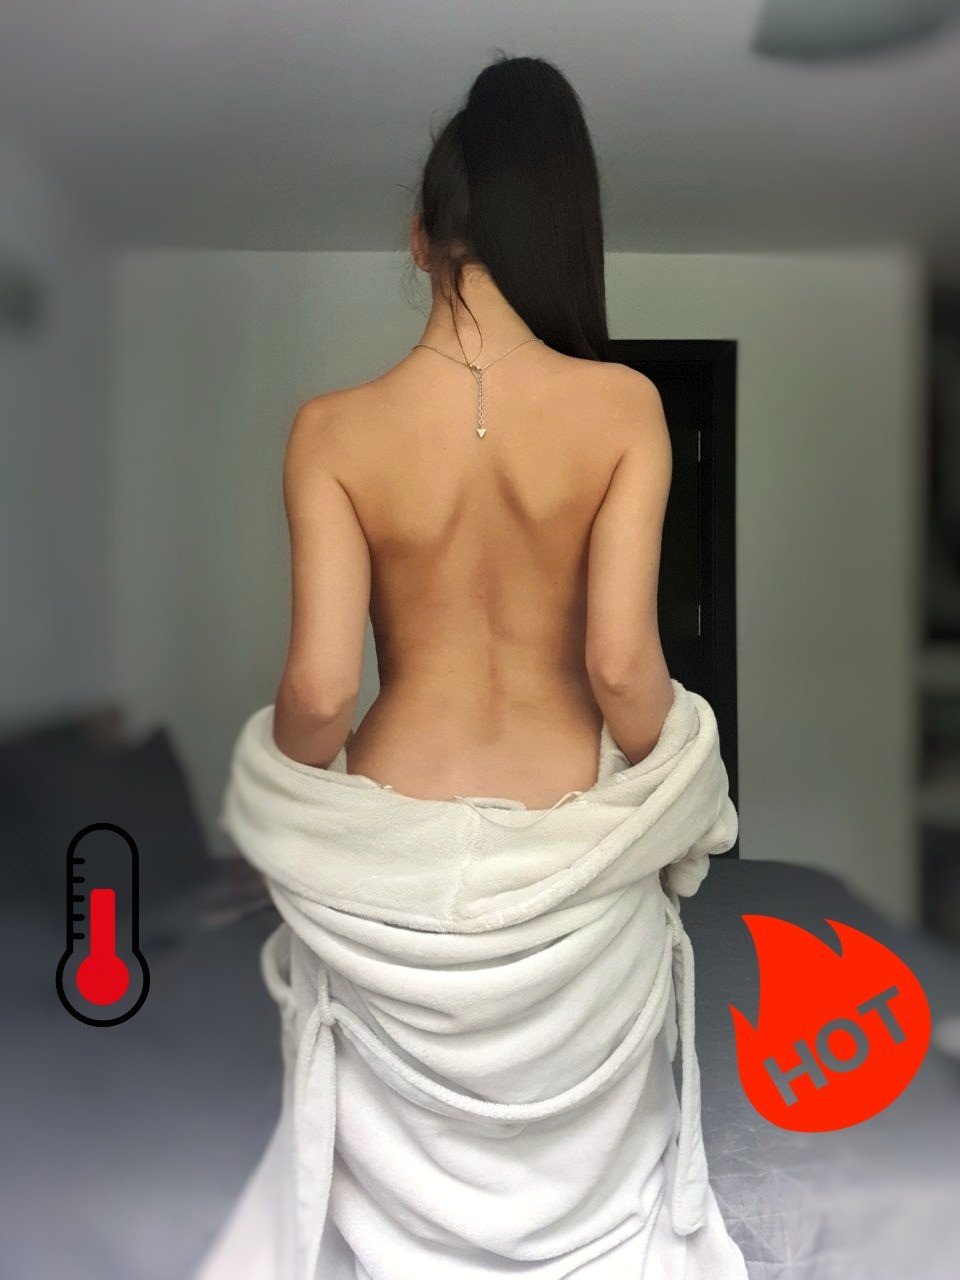 Photo by SereneSophie with the username @SereneSophie, who is a star user,  August 14, 2019 at 6:30 PM. The post is about the topic Ass and the text says '#Humpday #Booty #SexyAF #Bootylicious

It's gettin'🔥 hot in here...
Definitely will make me take off my🛀clothes💦...
How do you prefer... Hot or colder❓

💯Live🔛bit.ly/SereneSophie🔝💋'